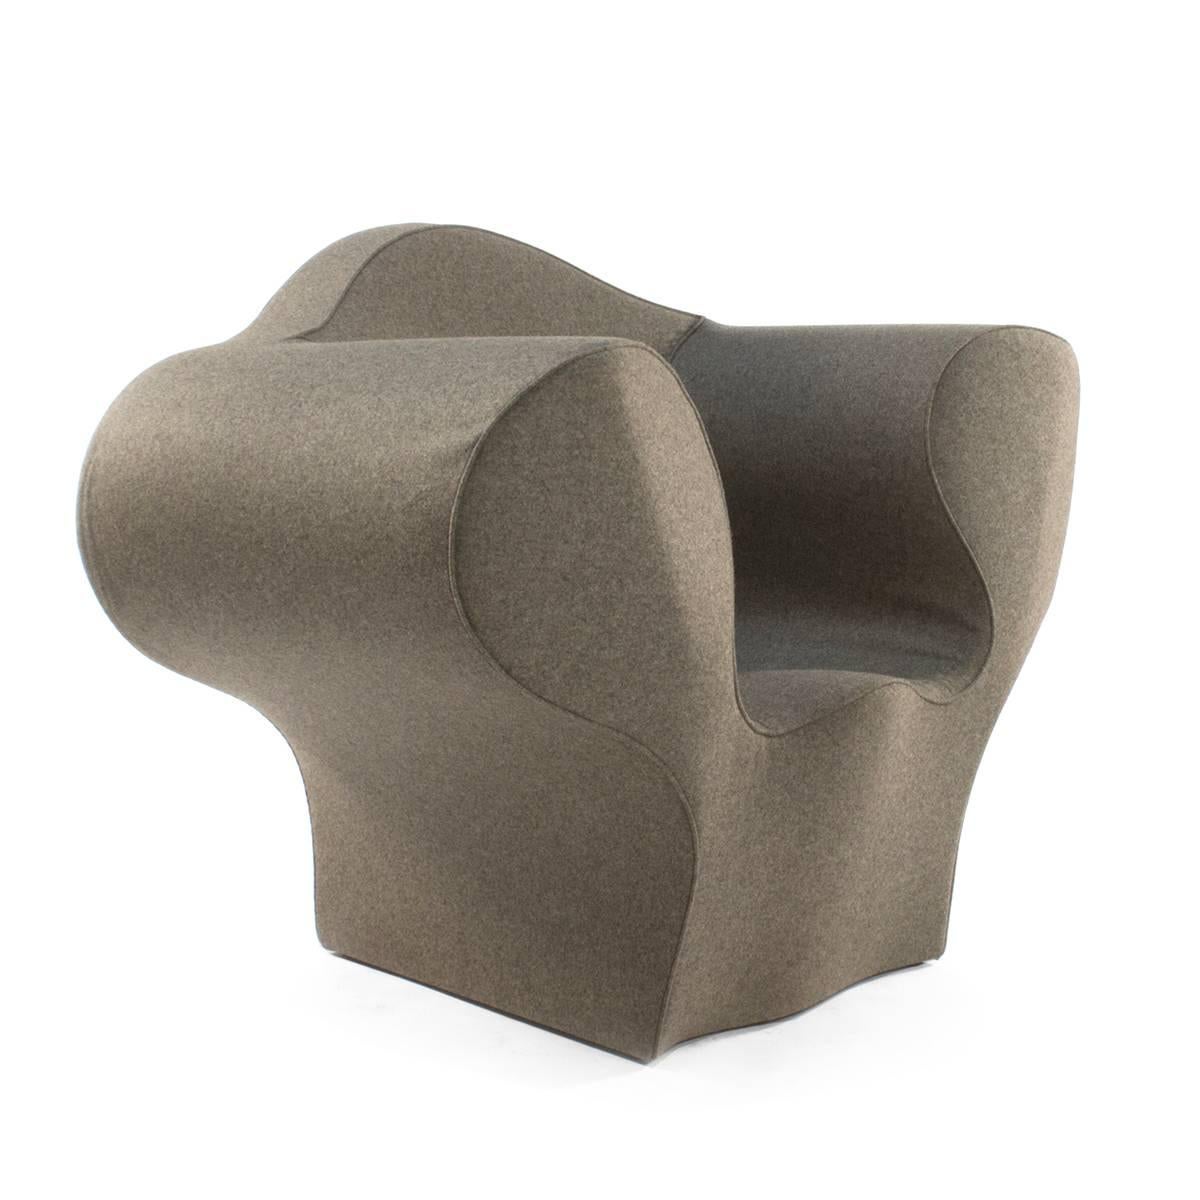 Soft big easy lounge armchair by Ron Arad for Moroso, Italy.